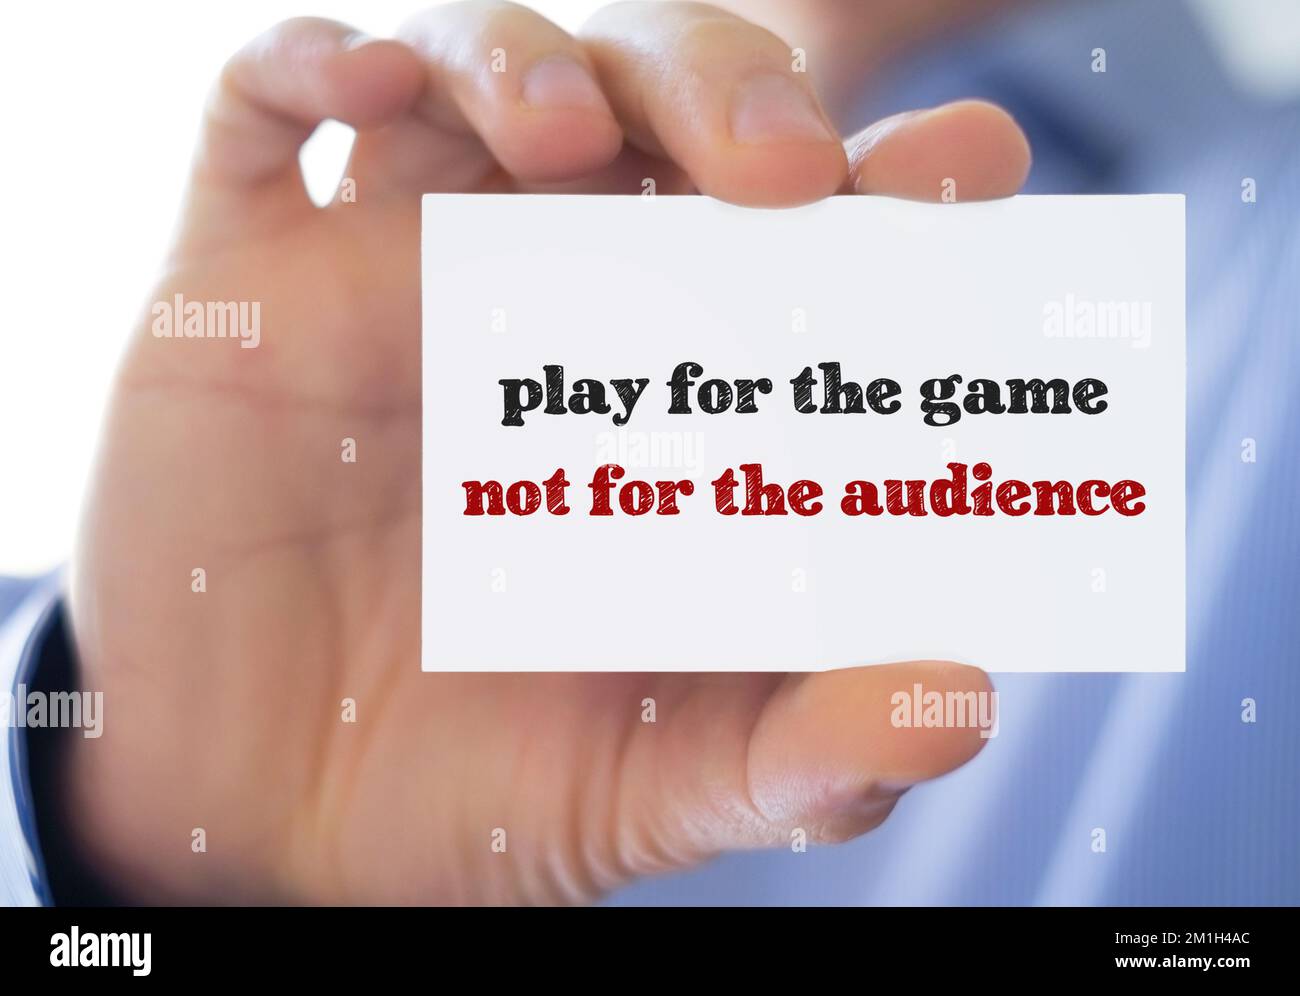 play for the game not for the audience Stock Photo